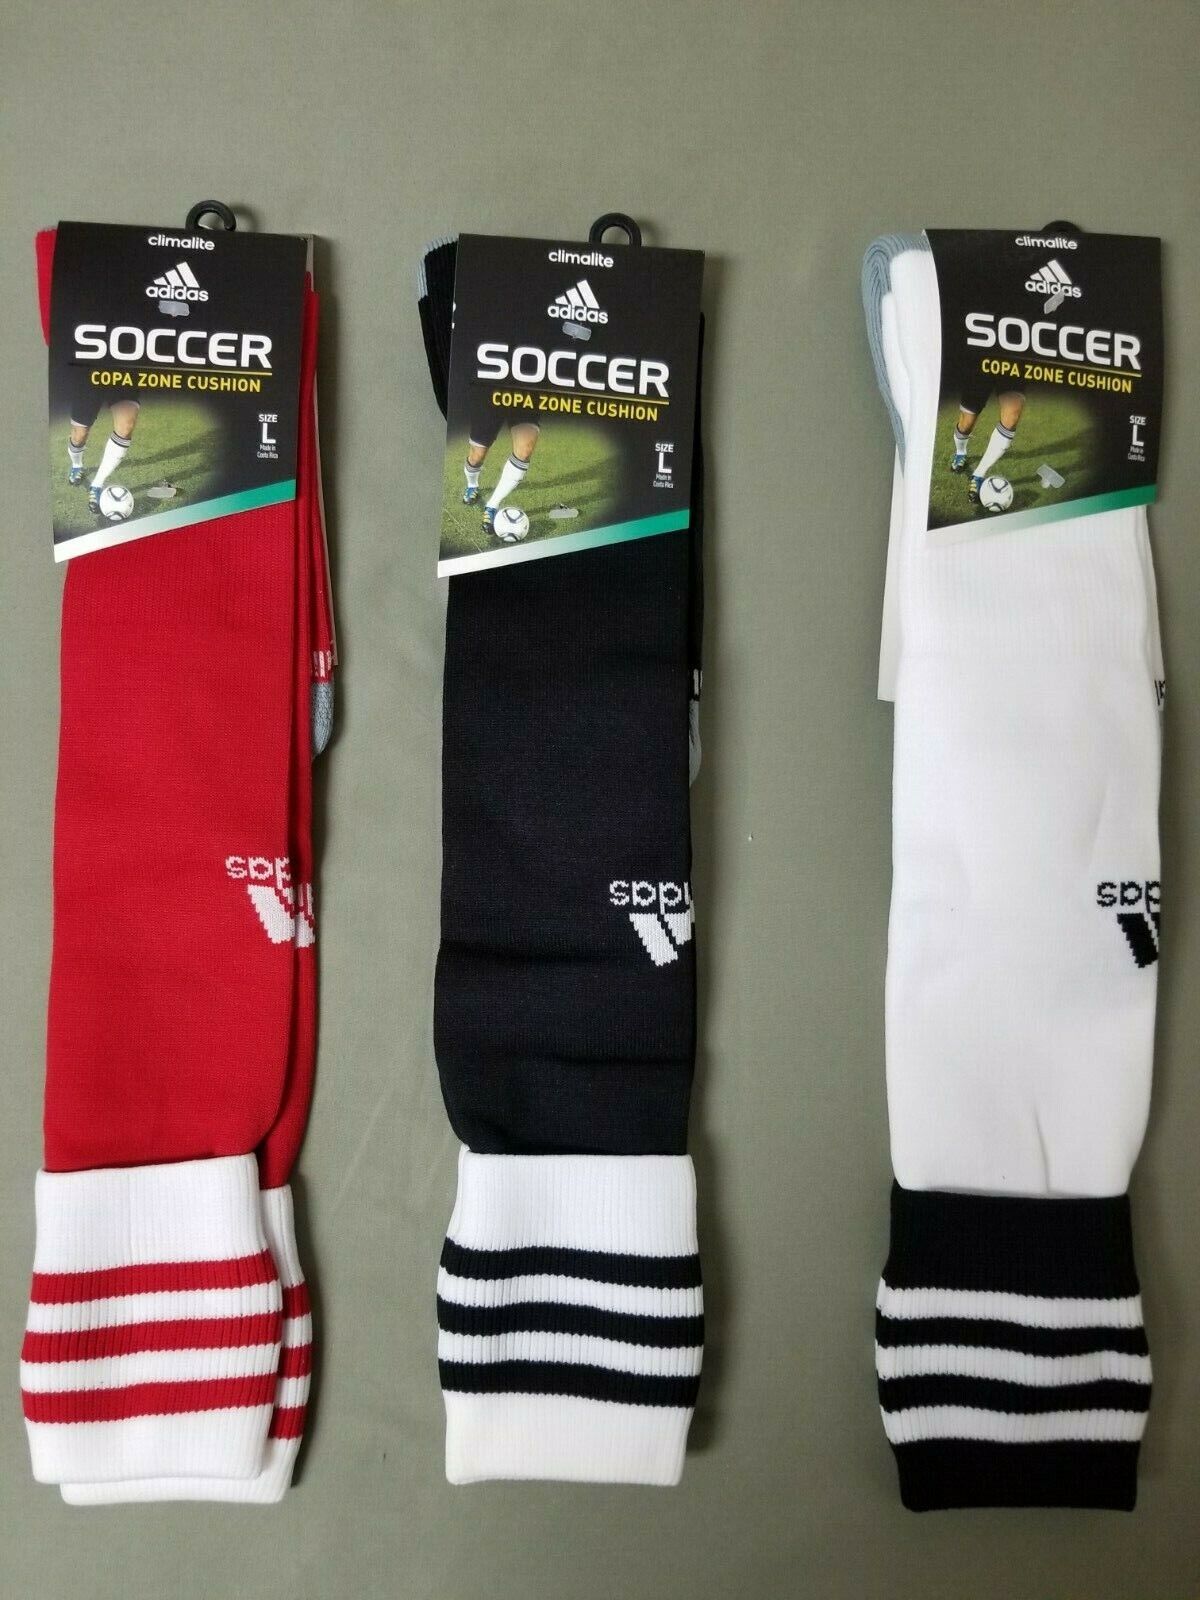 New Adidas Climalite Copa Zone Cushion Soccer Socks.  3 Colors To Choose.